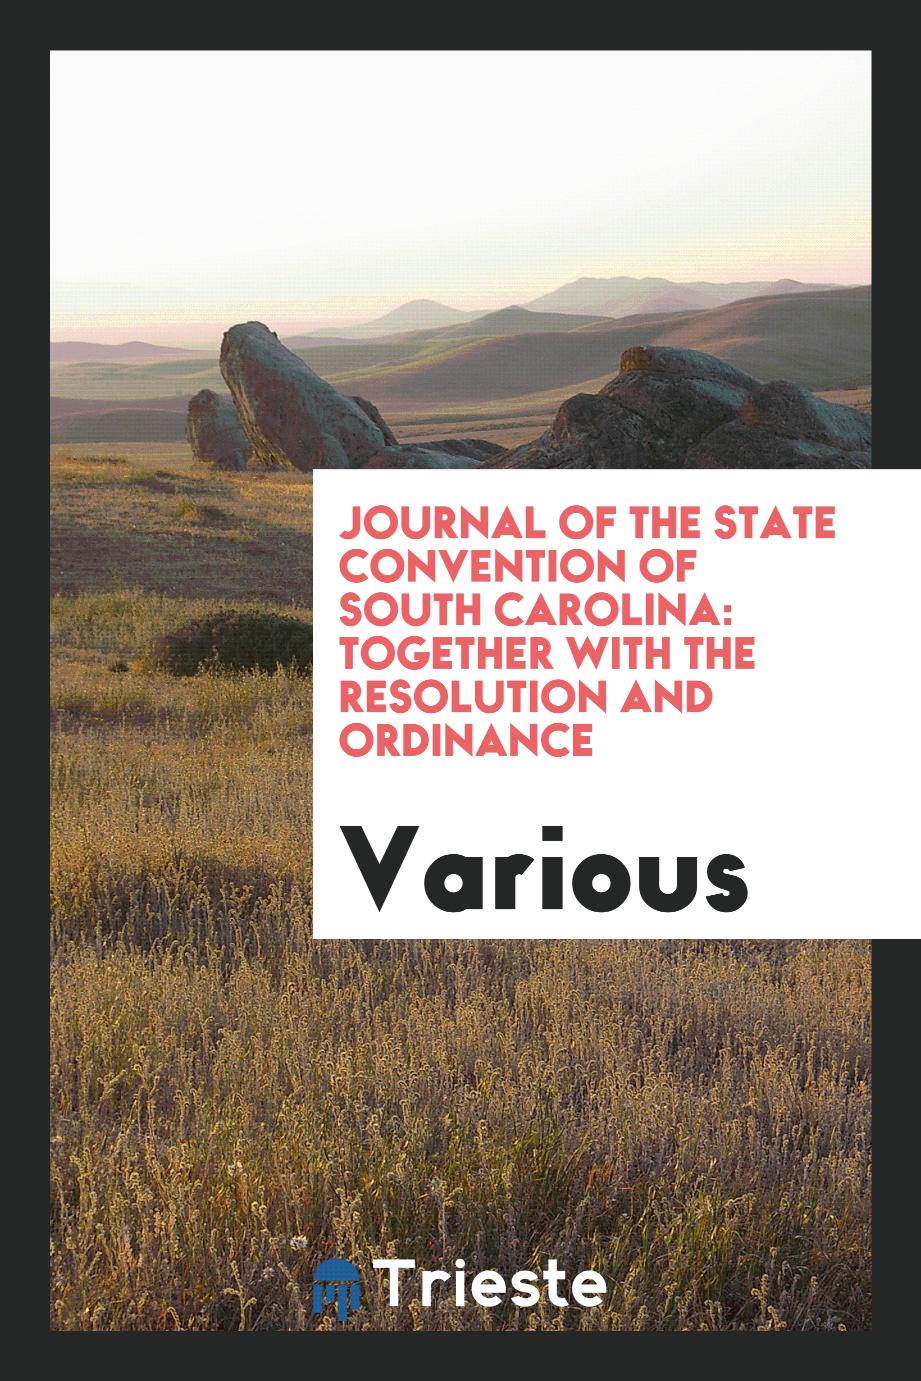 Journal of the State Convention of South Carolina: Together with the Resolution and Ordinance